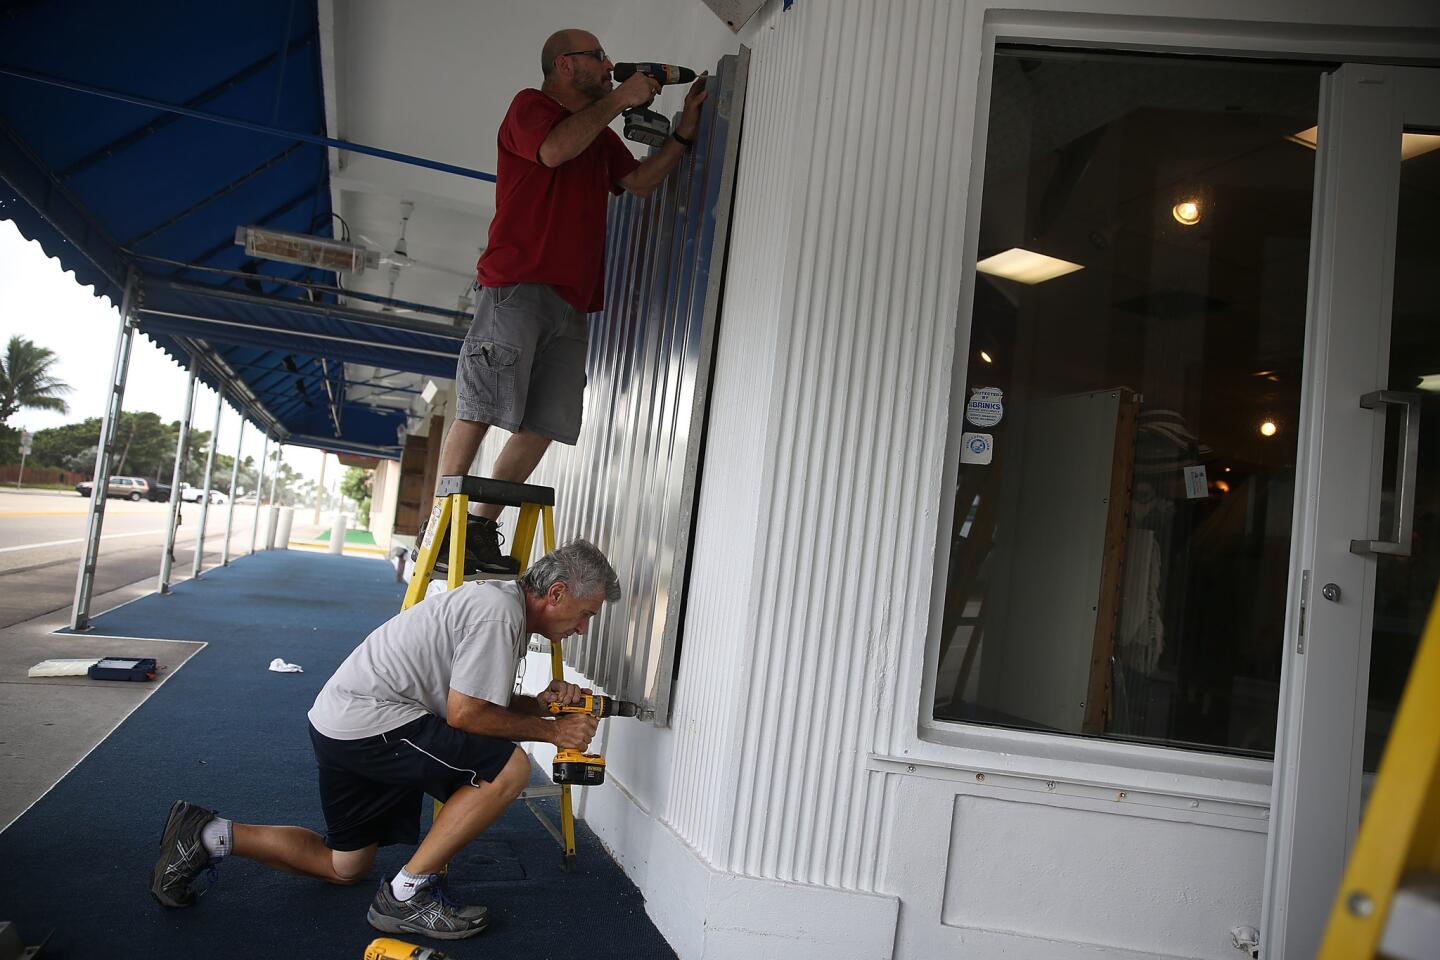 Pat Lena and Frank Capano (bottom) put up hurricane shutters as they prepare a shop for Hurricane Matthew on October 6, 2016 in Delray Beach.